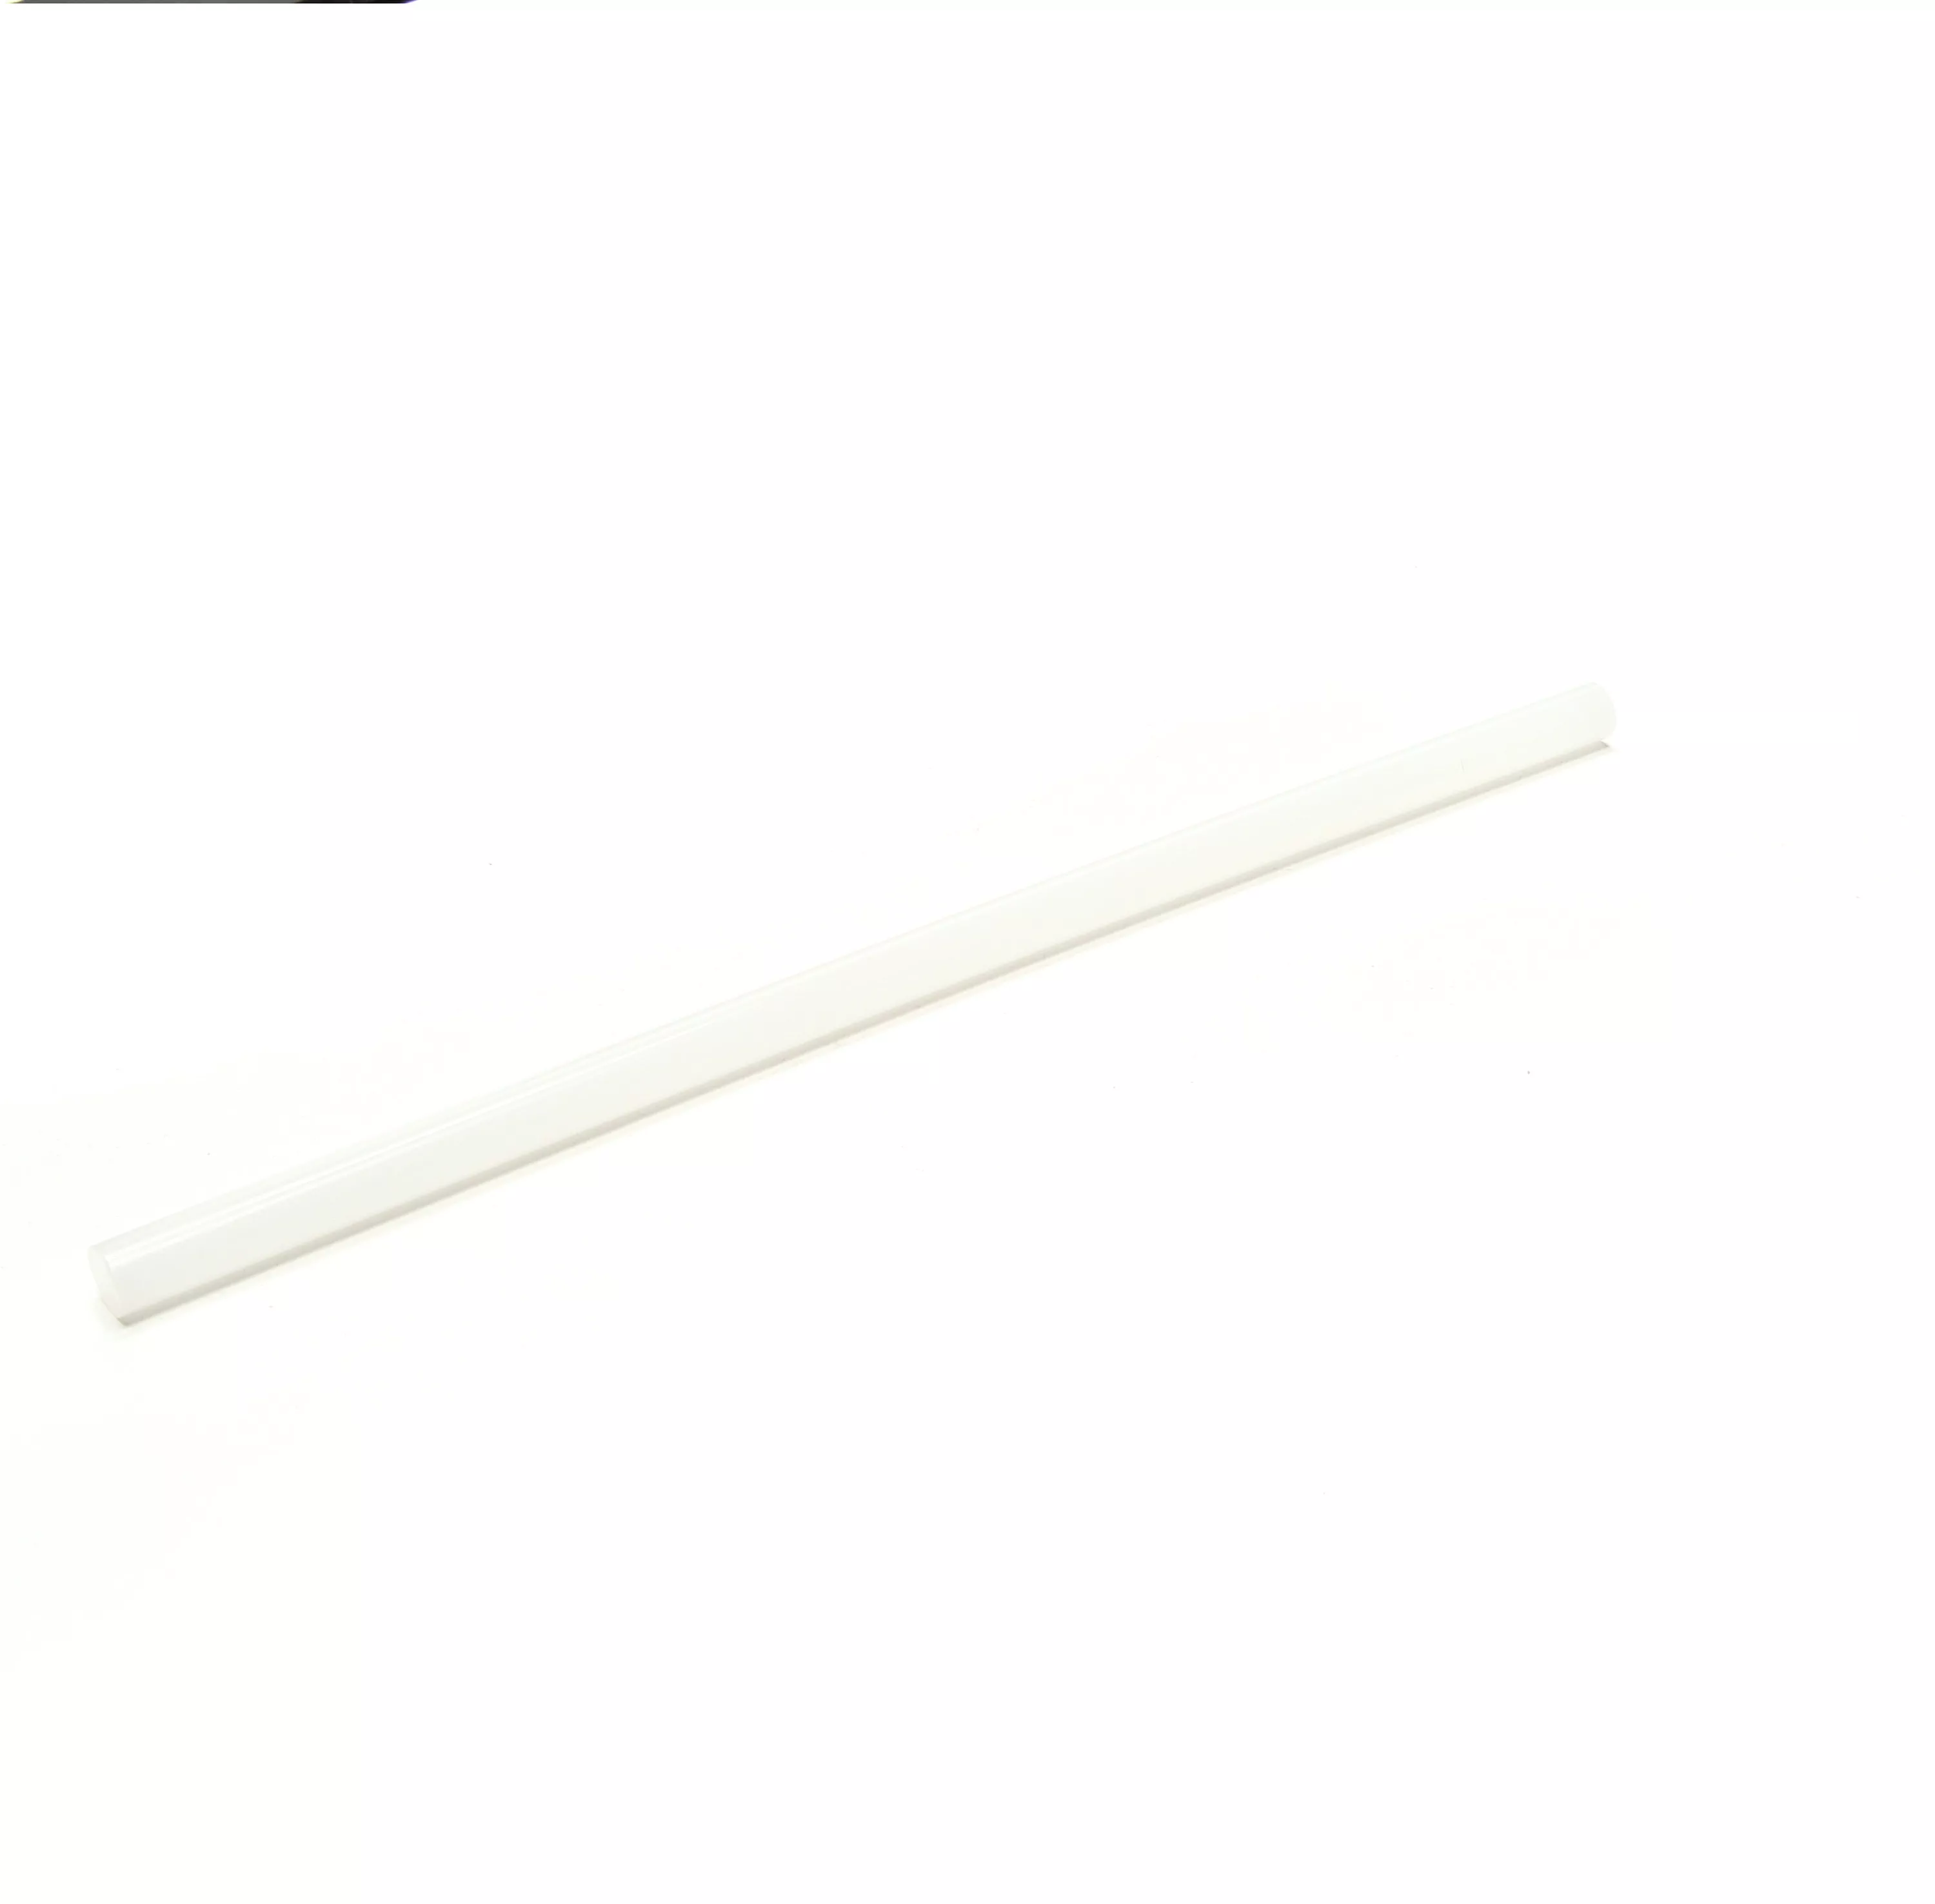 3M™ Hot Melt Adhesive 3764AE, Clear, 0.45 in x 12 in, 11 lb, Case